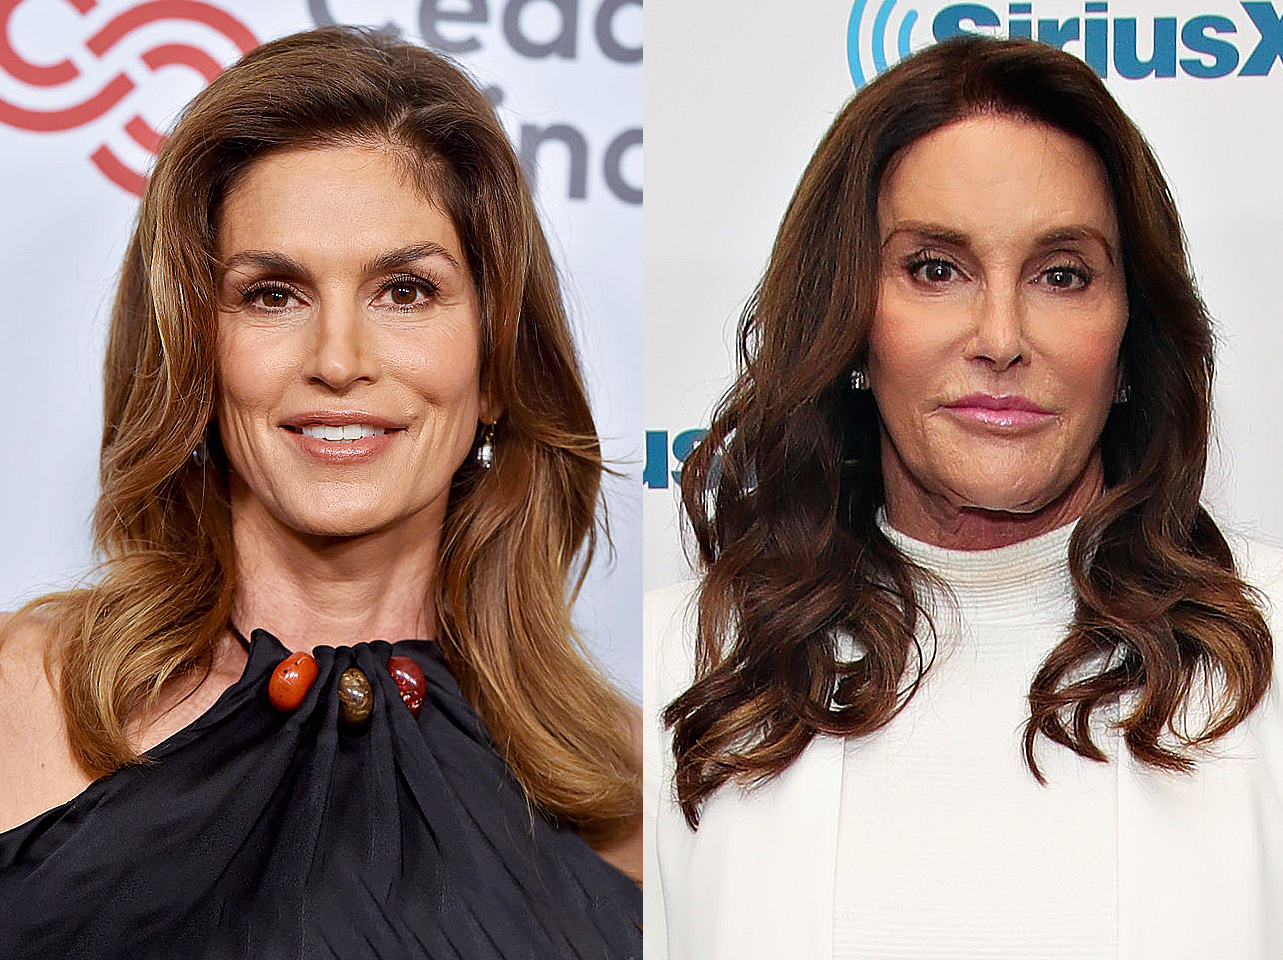 Caitlyn Jenner et Cindy Crawford | Source : Getty Images